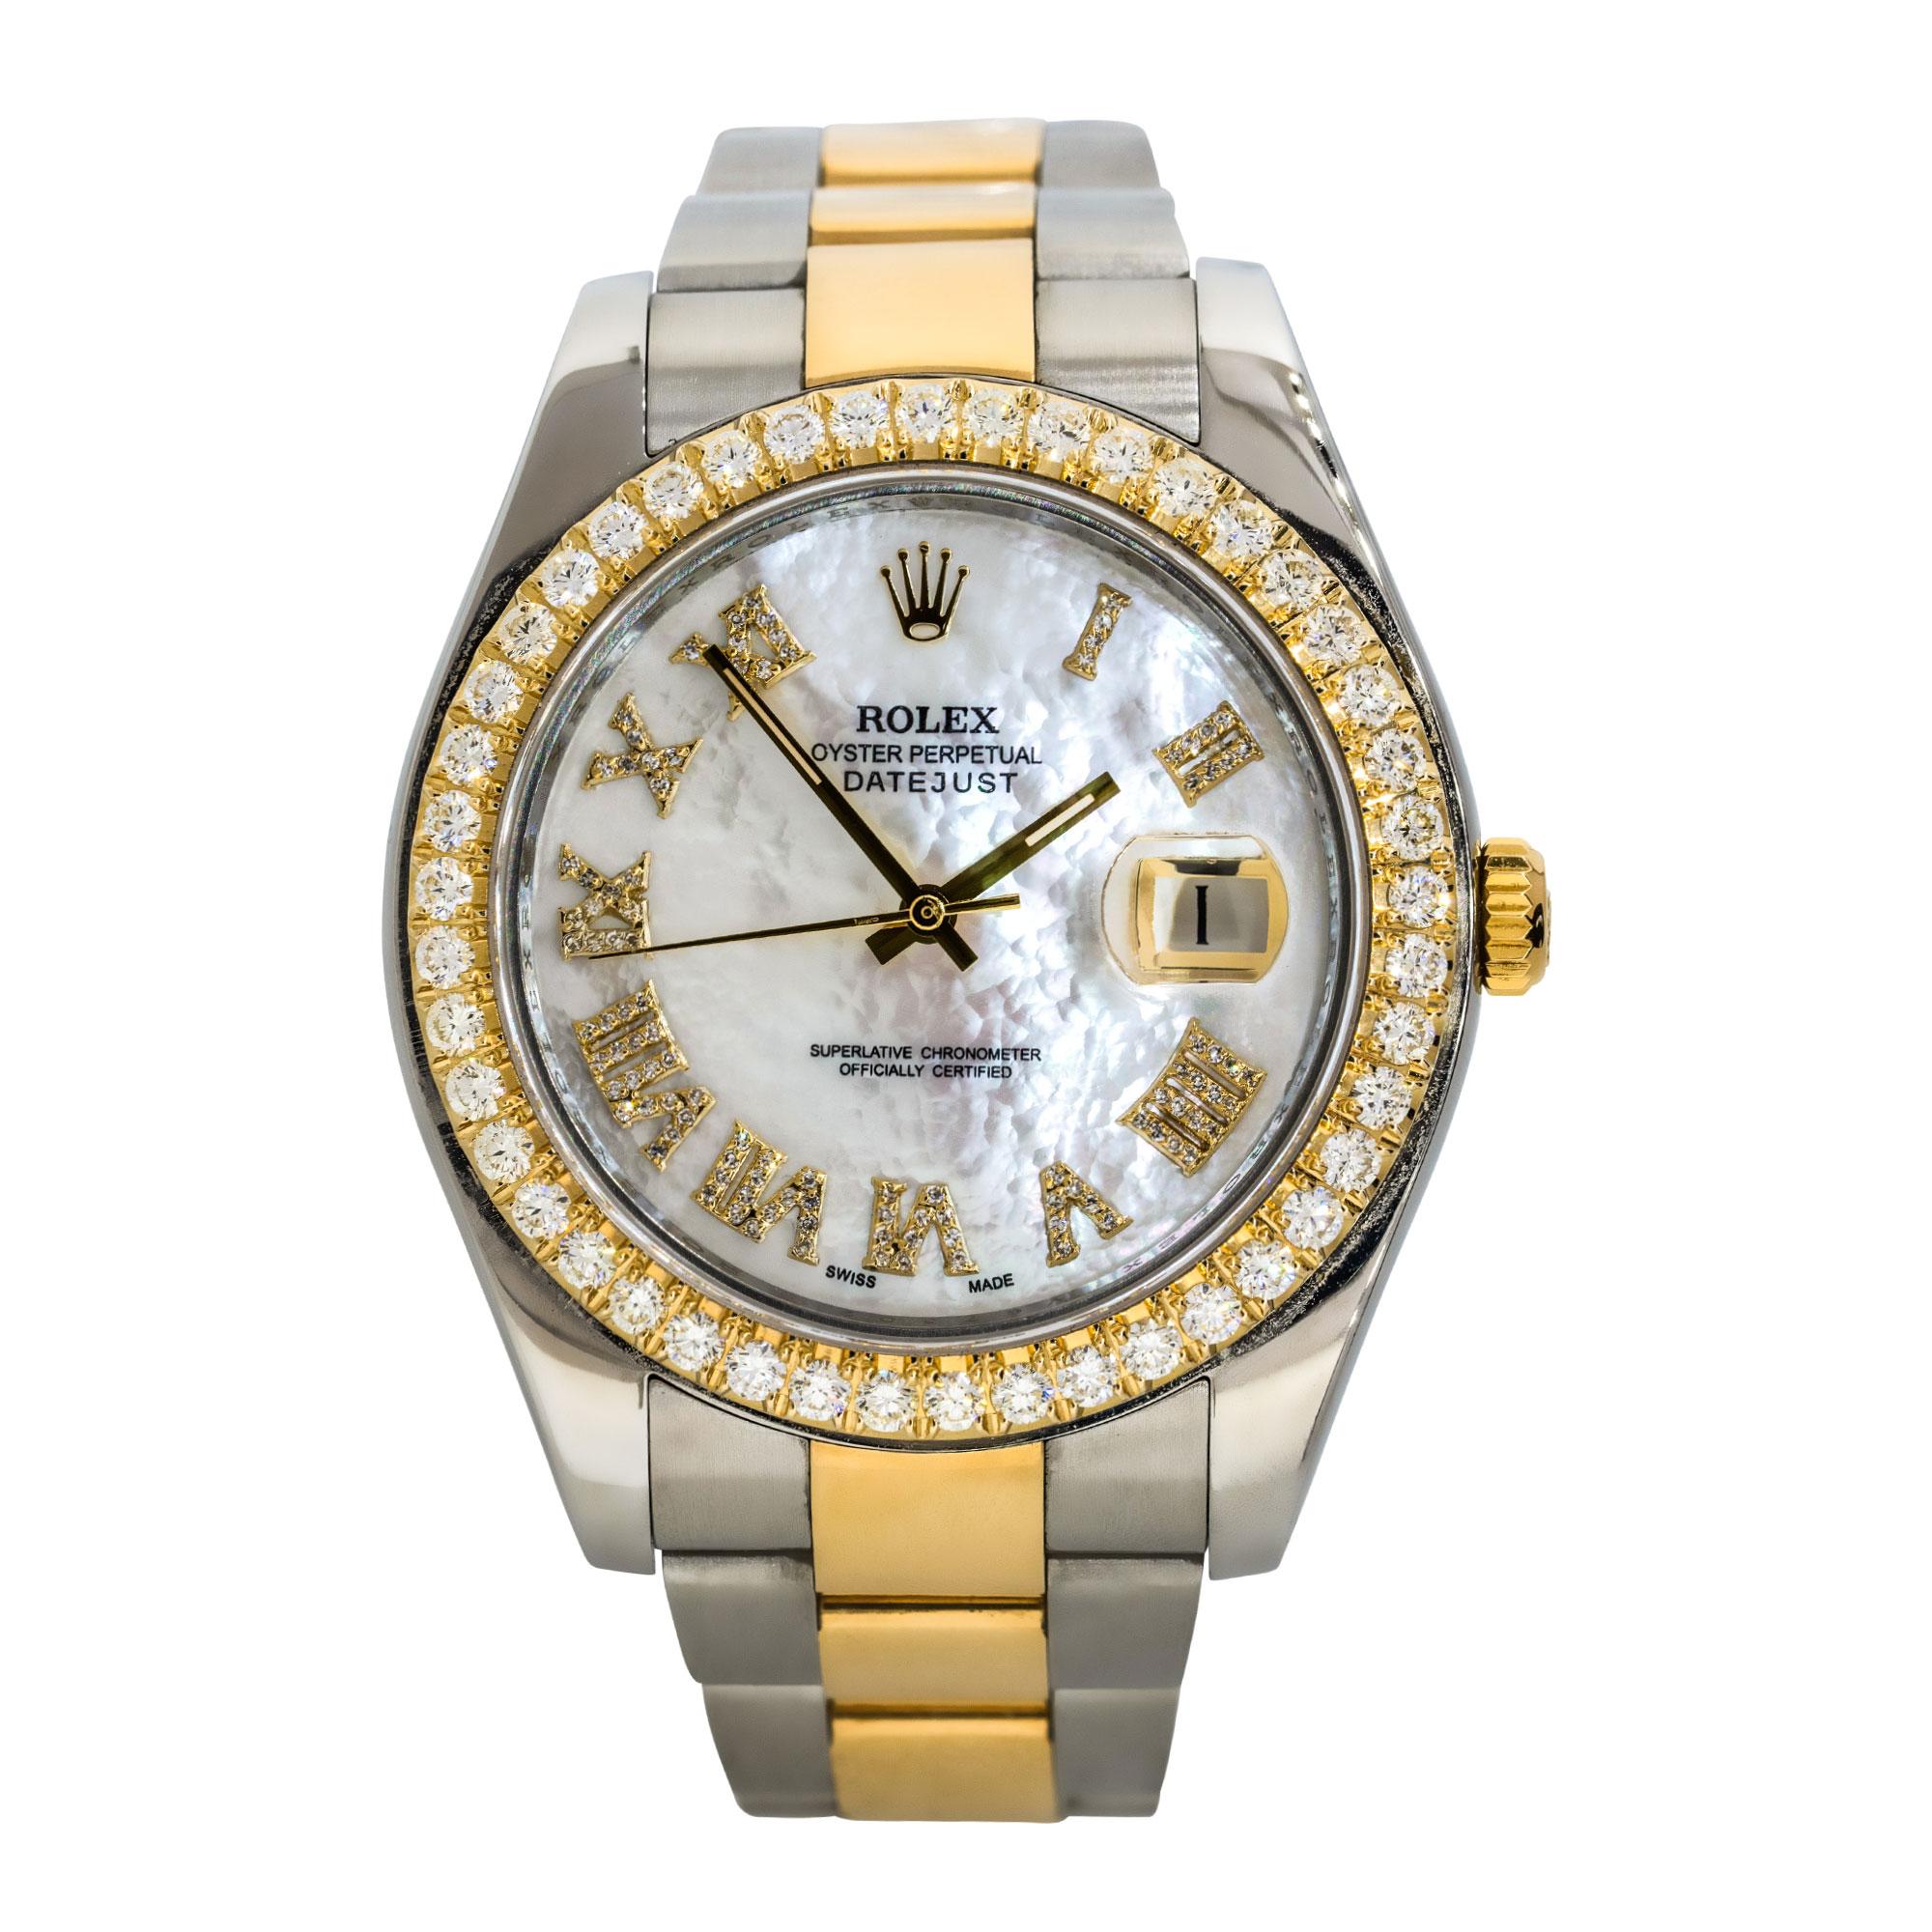 Brand: Rolex
MPN: 116333
Model: Datejust II
Case Material: Stainless Steel
Case Diameter: 41mm
Crystal: Sapphire Crystal
Bezel: 18k Yellow gold bezel with approx. 2.3ctw of Diamonds (Aftermarket)
Dial: White mother of pearl dial with yellow gold